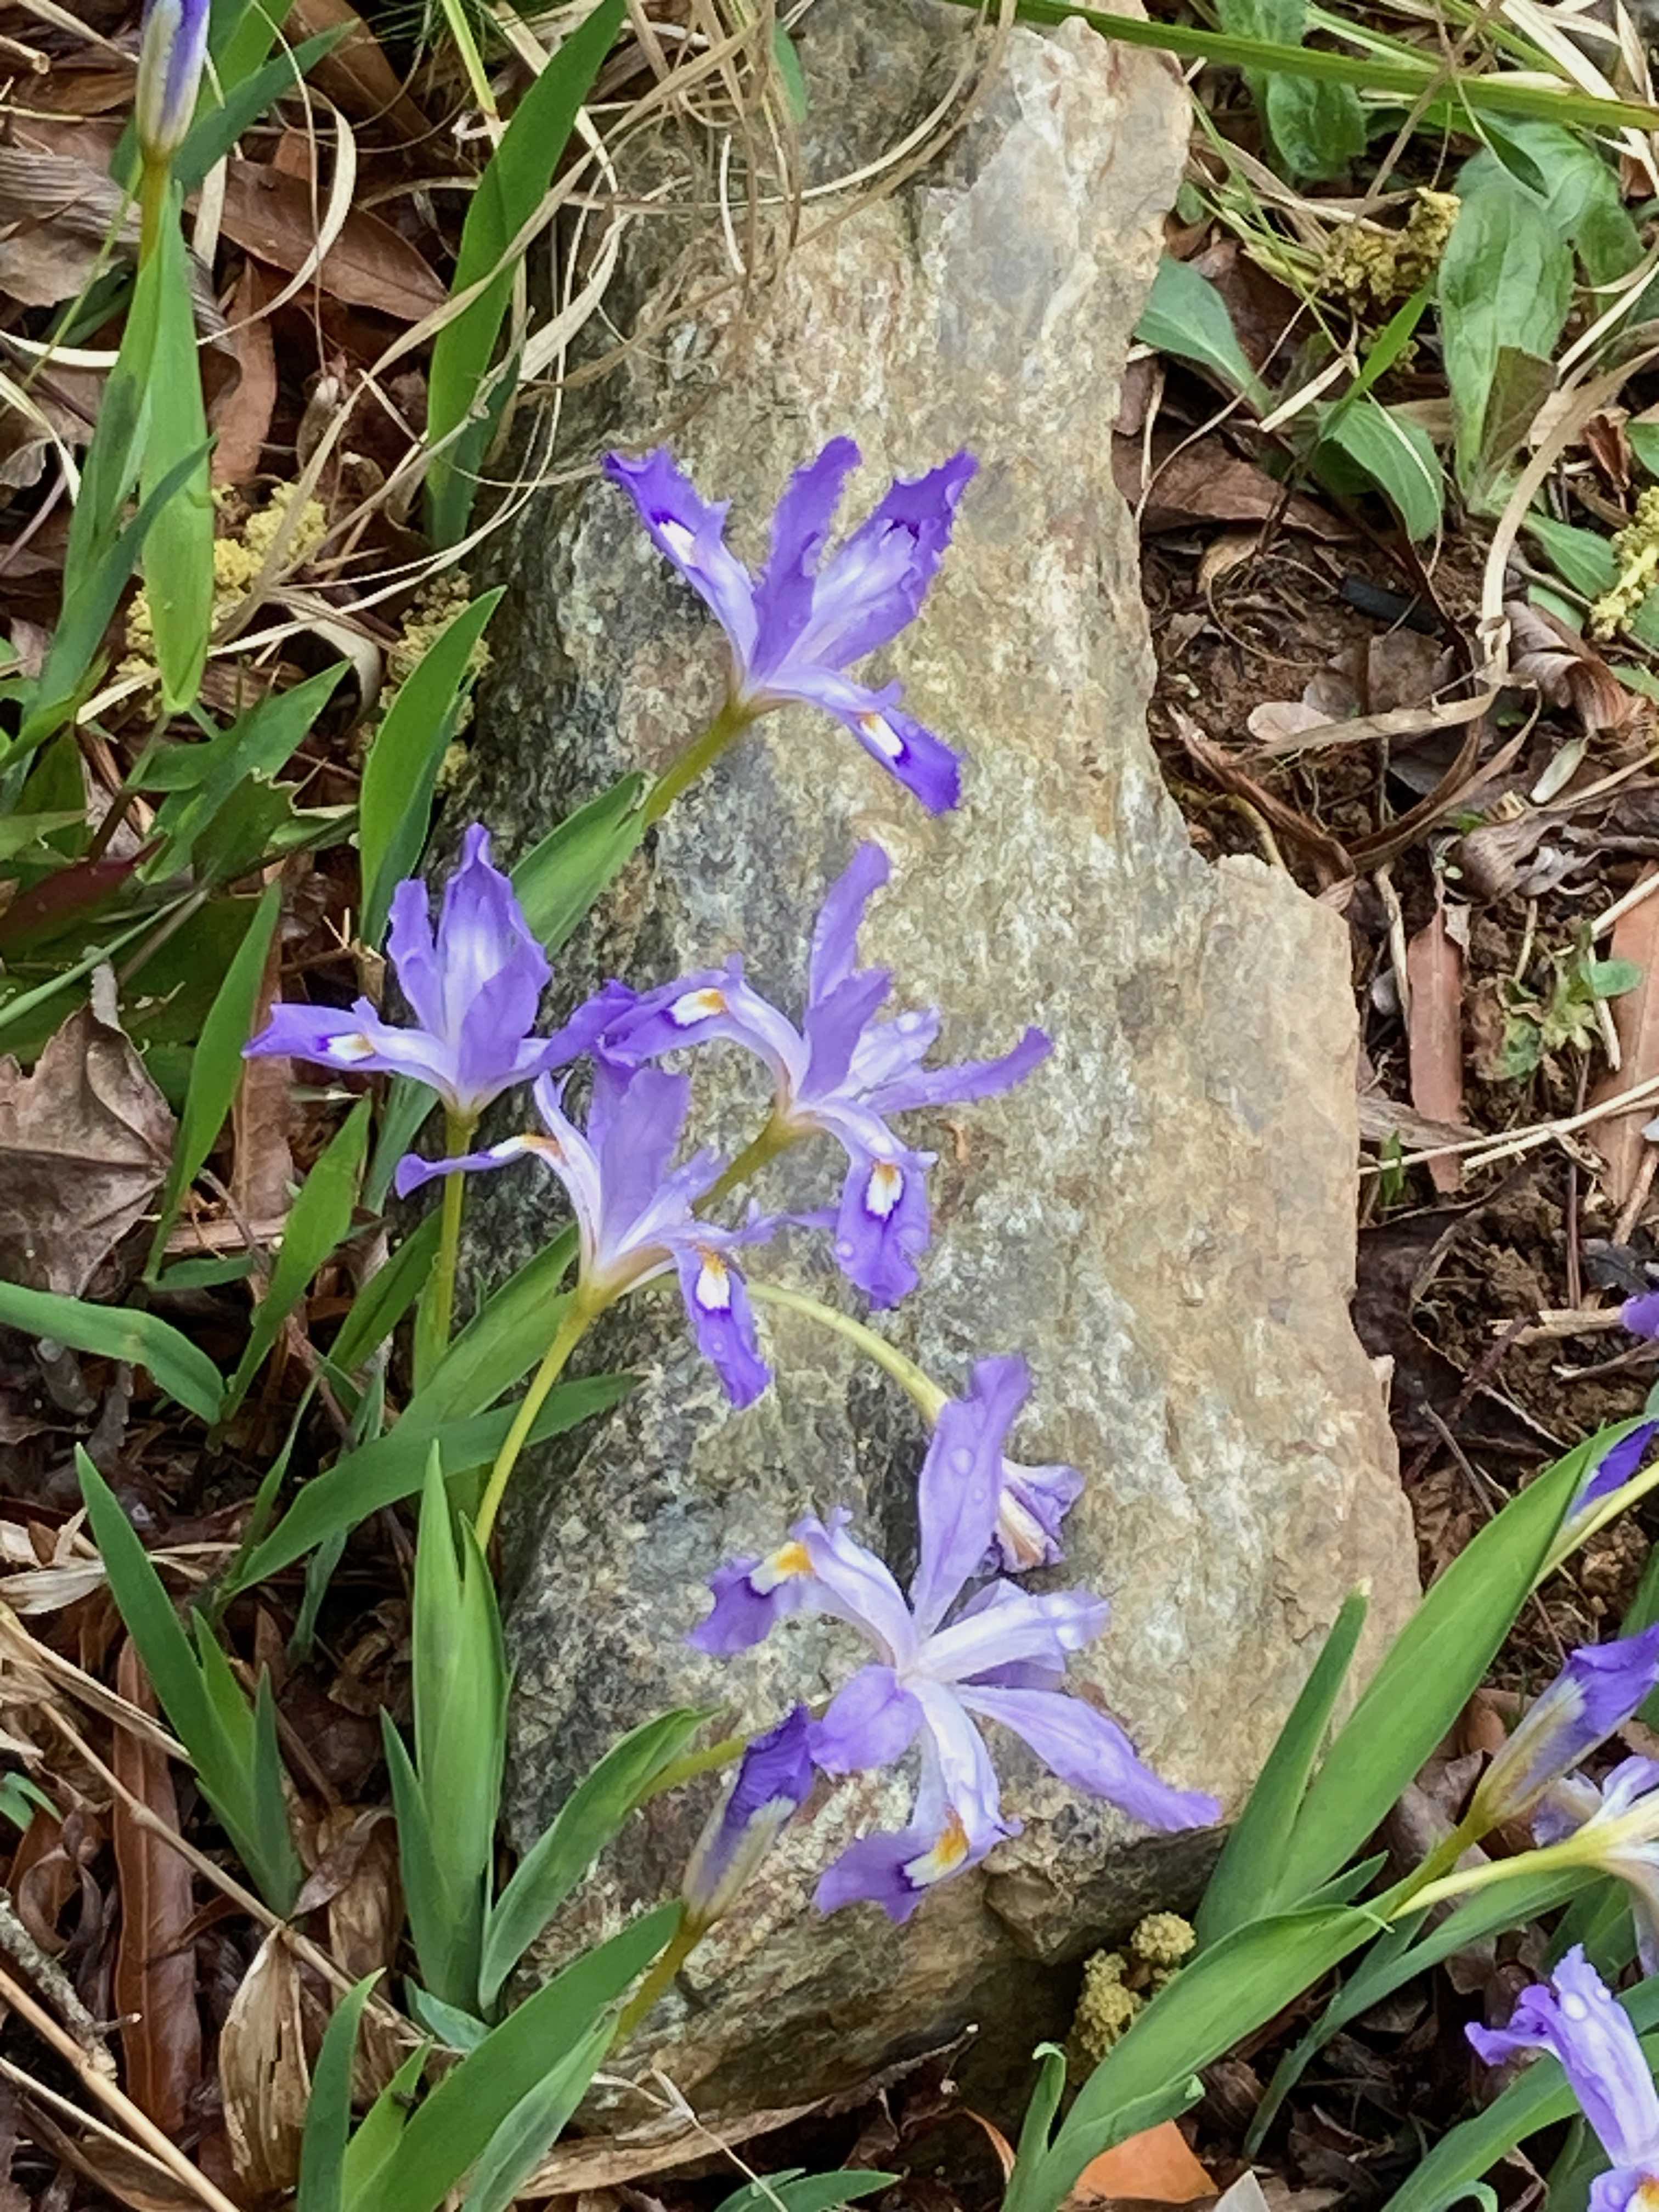 The Scientific Name is Iris cristata. You will likely hear them called Dwarf Crested Iris. This picture shows the  of Iris cristata